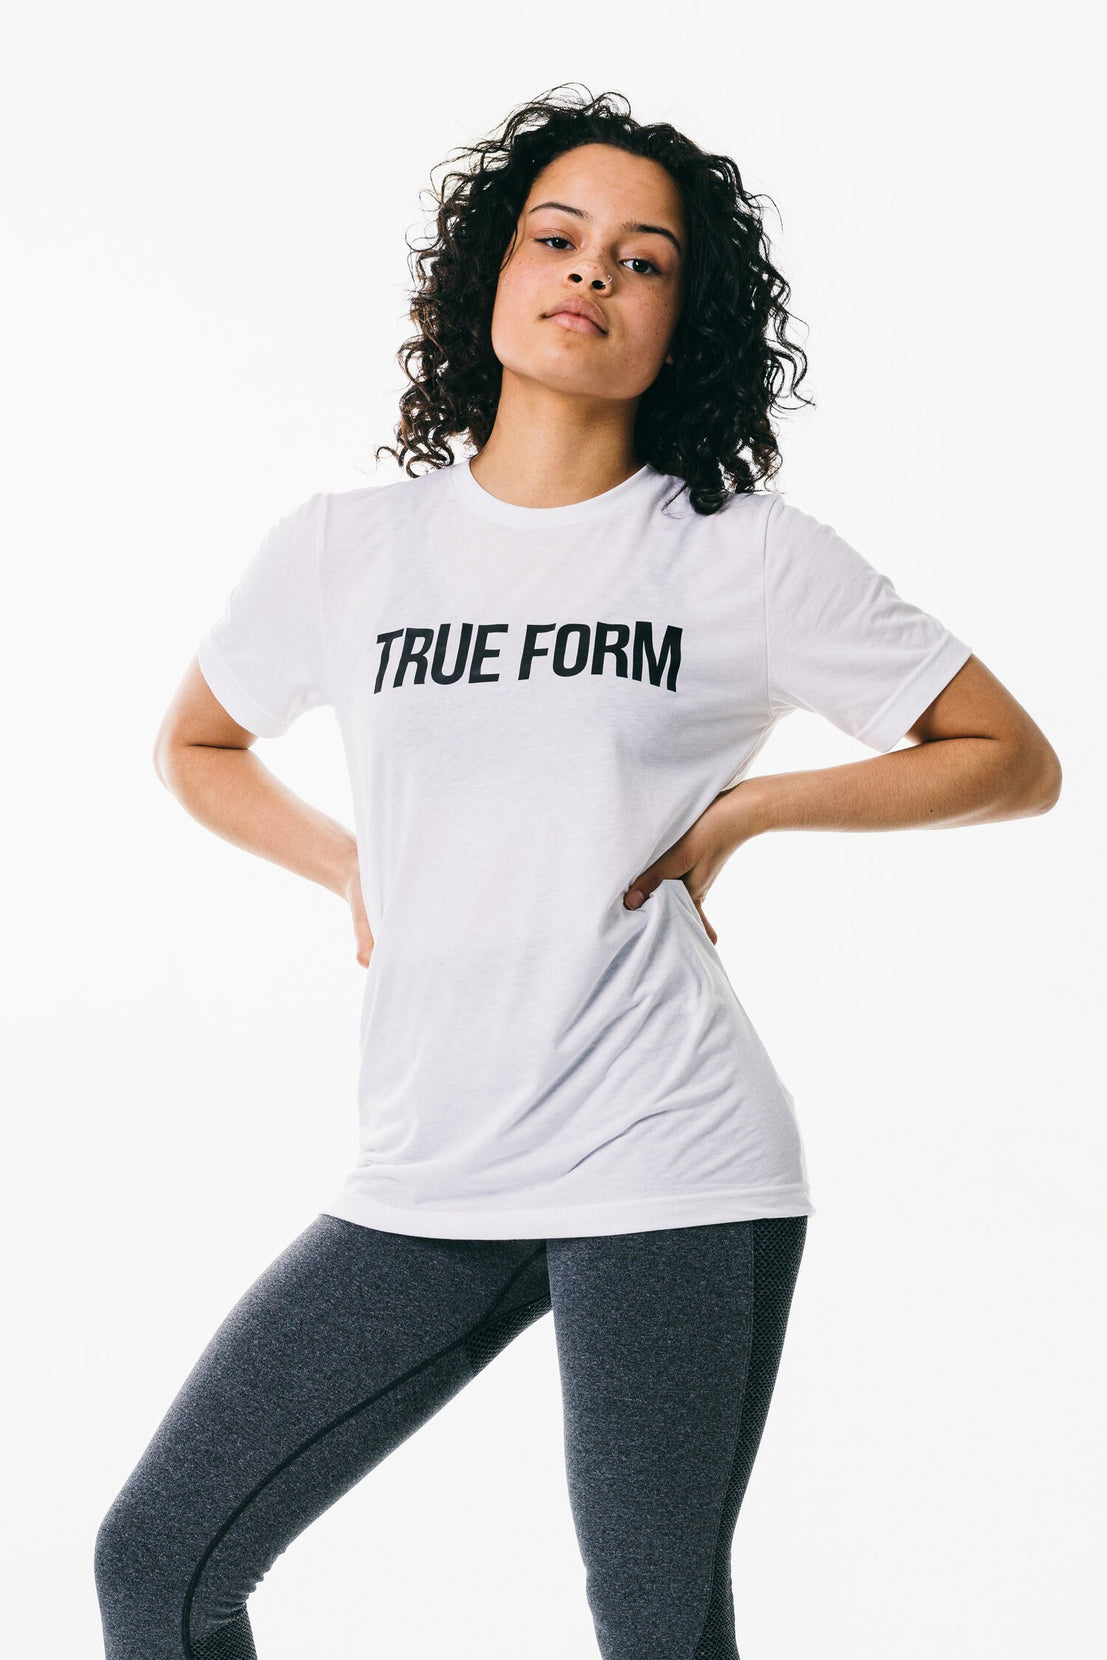 Unisex White T-Shirt of Statement Clothing Collection True Form UK